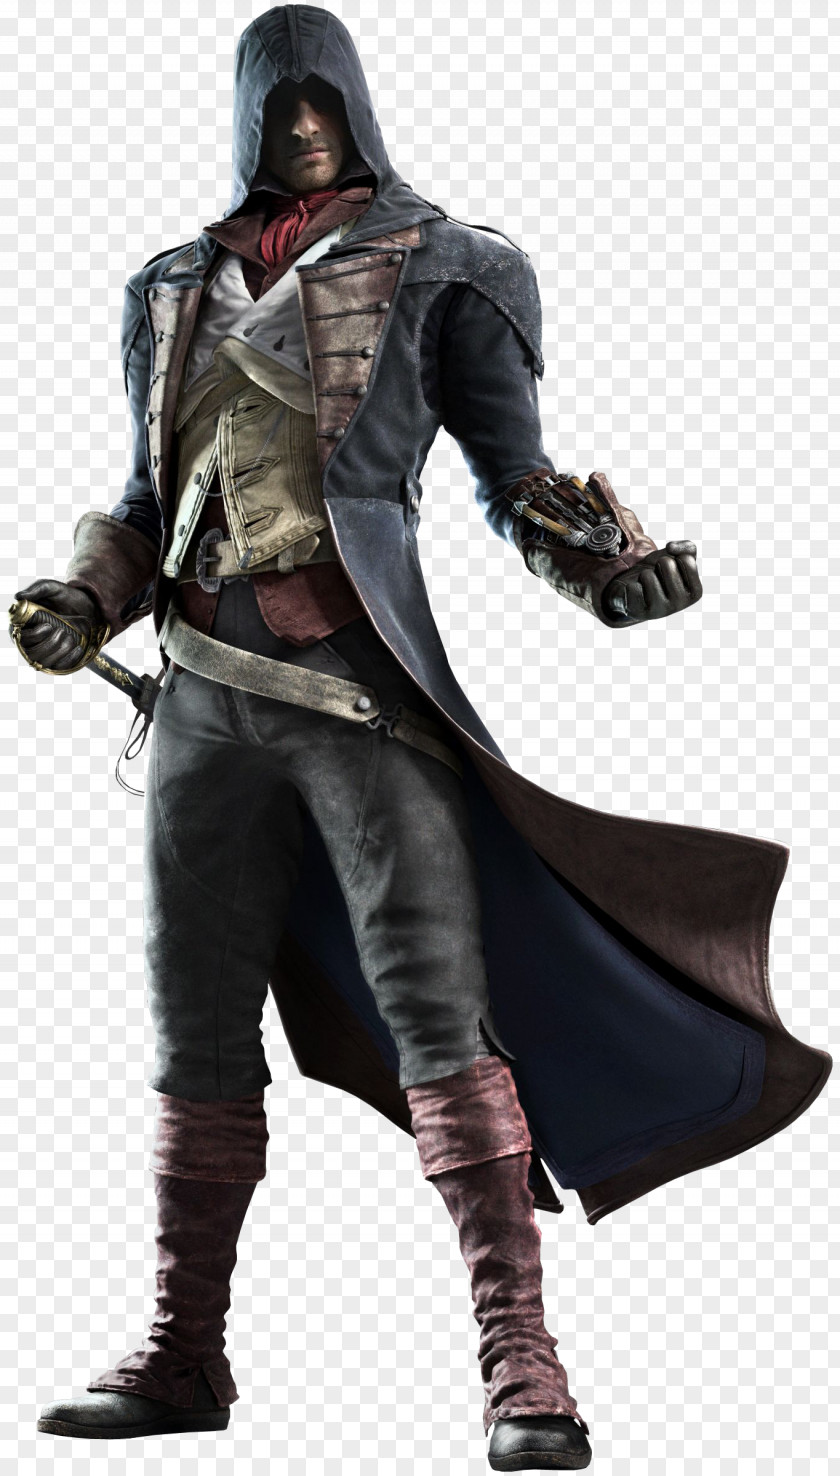 Assassins Creed Unity Assassin's Syndicate Video Game Arno Dorian PNG